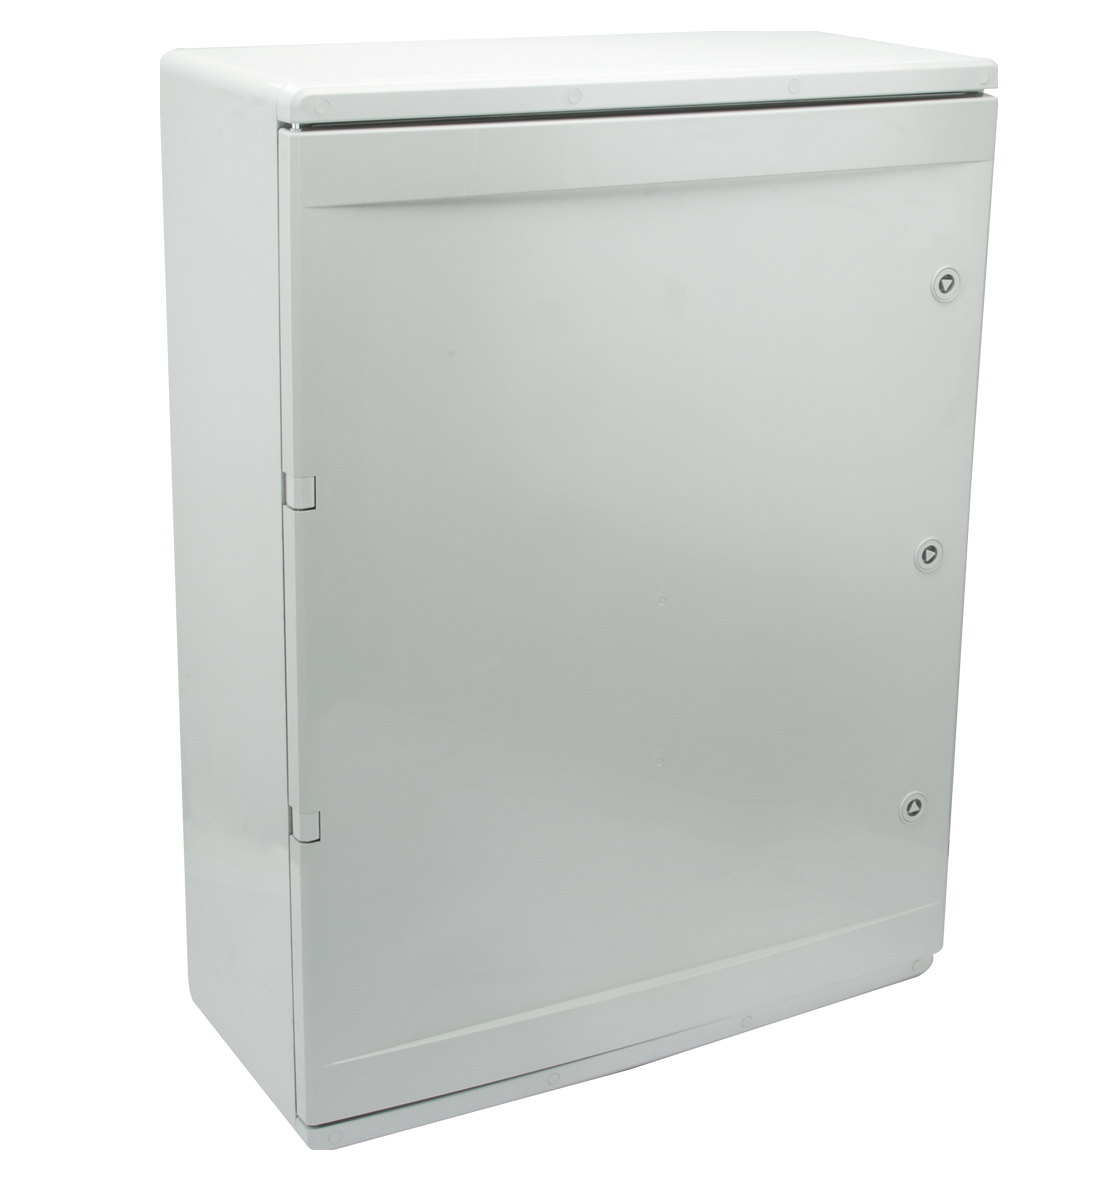 Thermoplastic cabinets